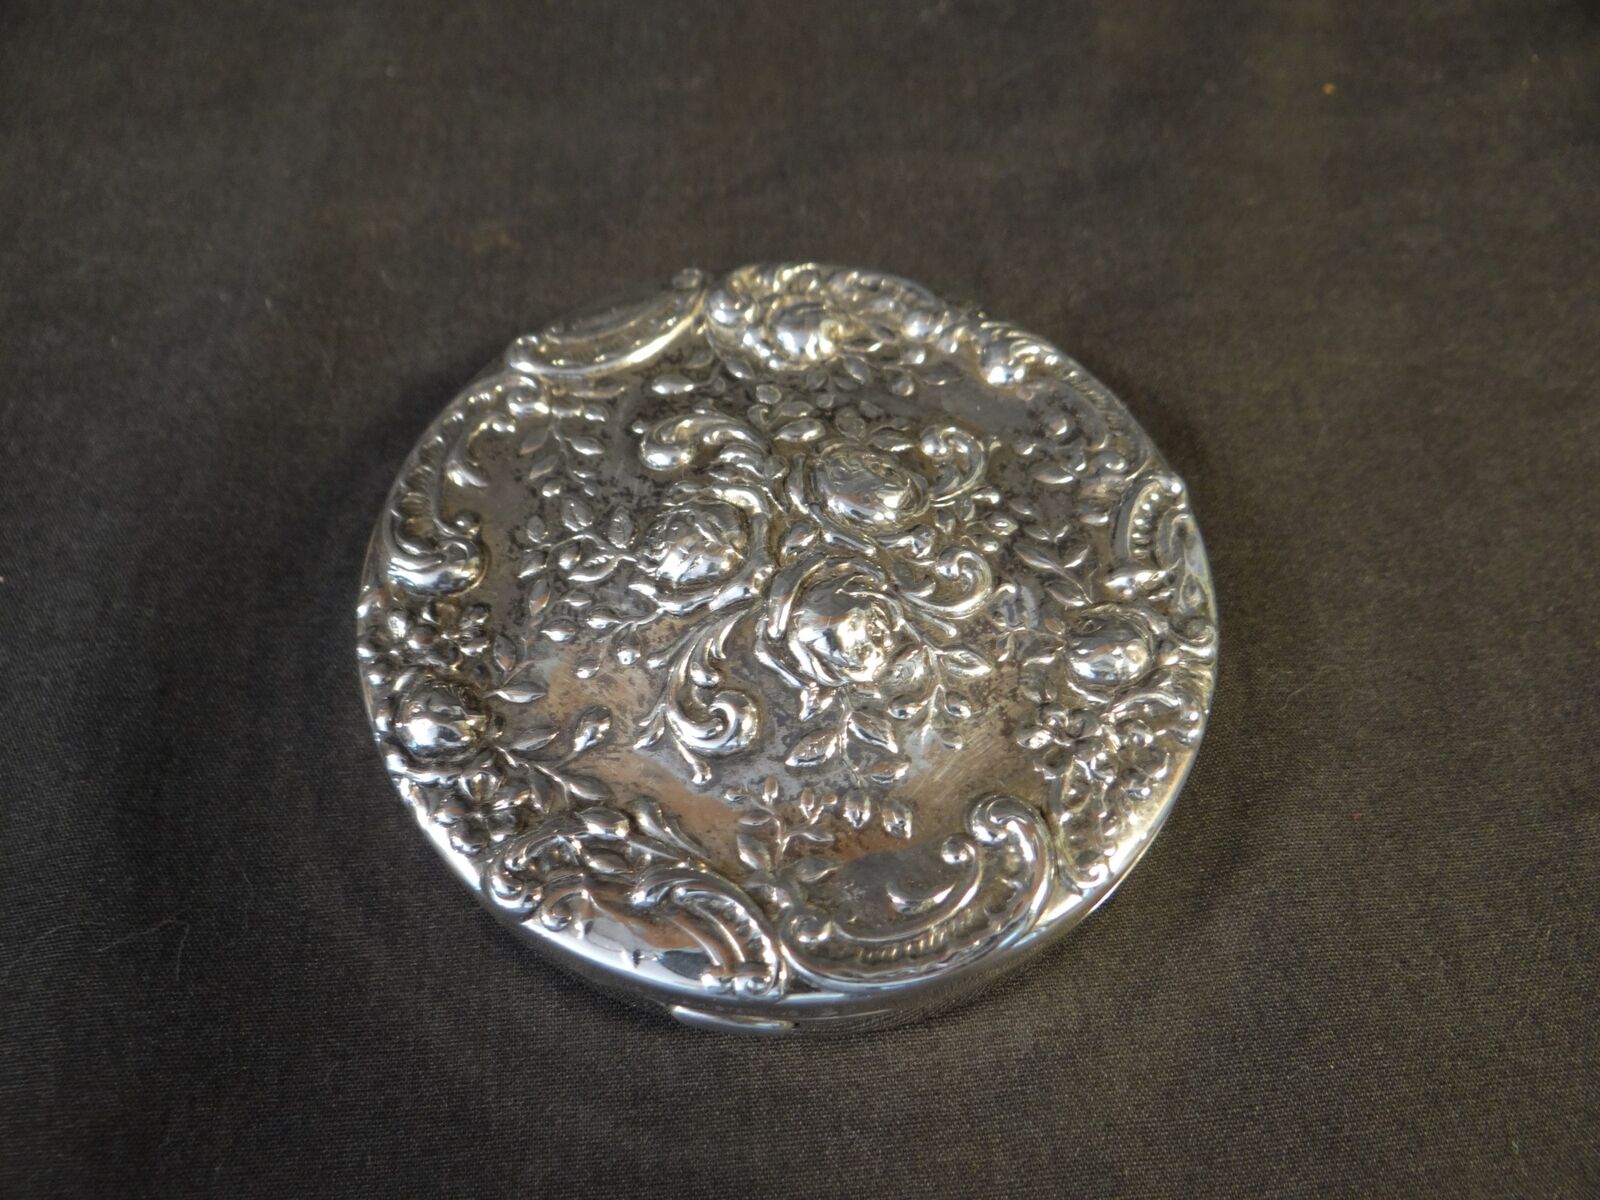 ANTIQUE GORHAM REPOUSSE ROSES STERLING SILVER COMPACT BEAUTIFUL